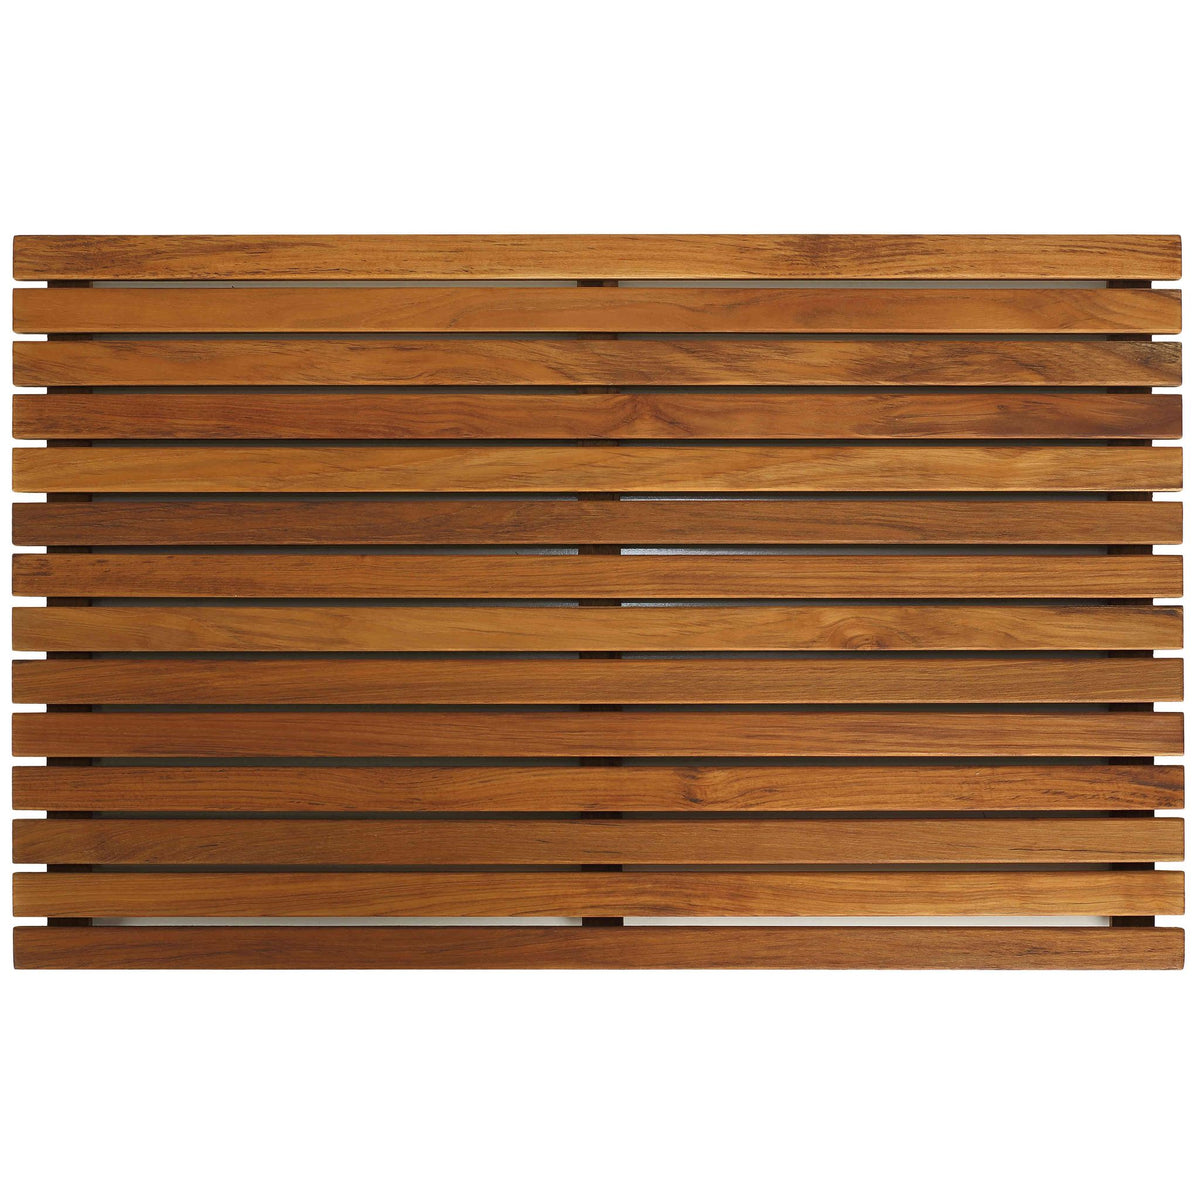 Bare Decor Zen Shower, Spa, Door Mat in Solid Teak Wood and Oiled Finish, Large: 31.5&quot; x 19.5&quot;